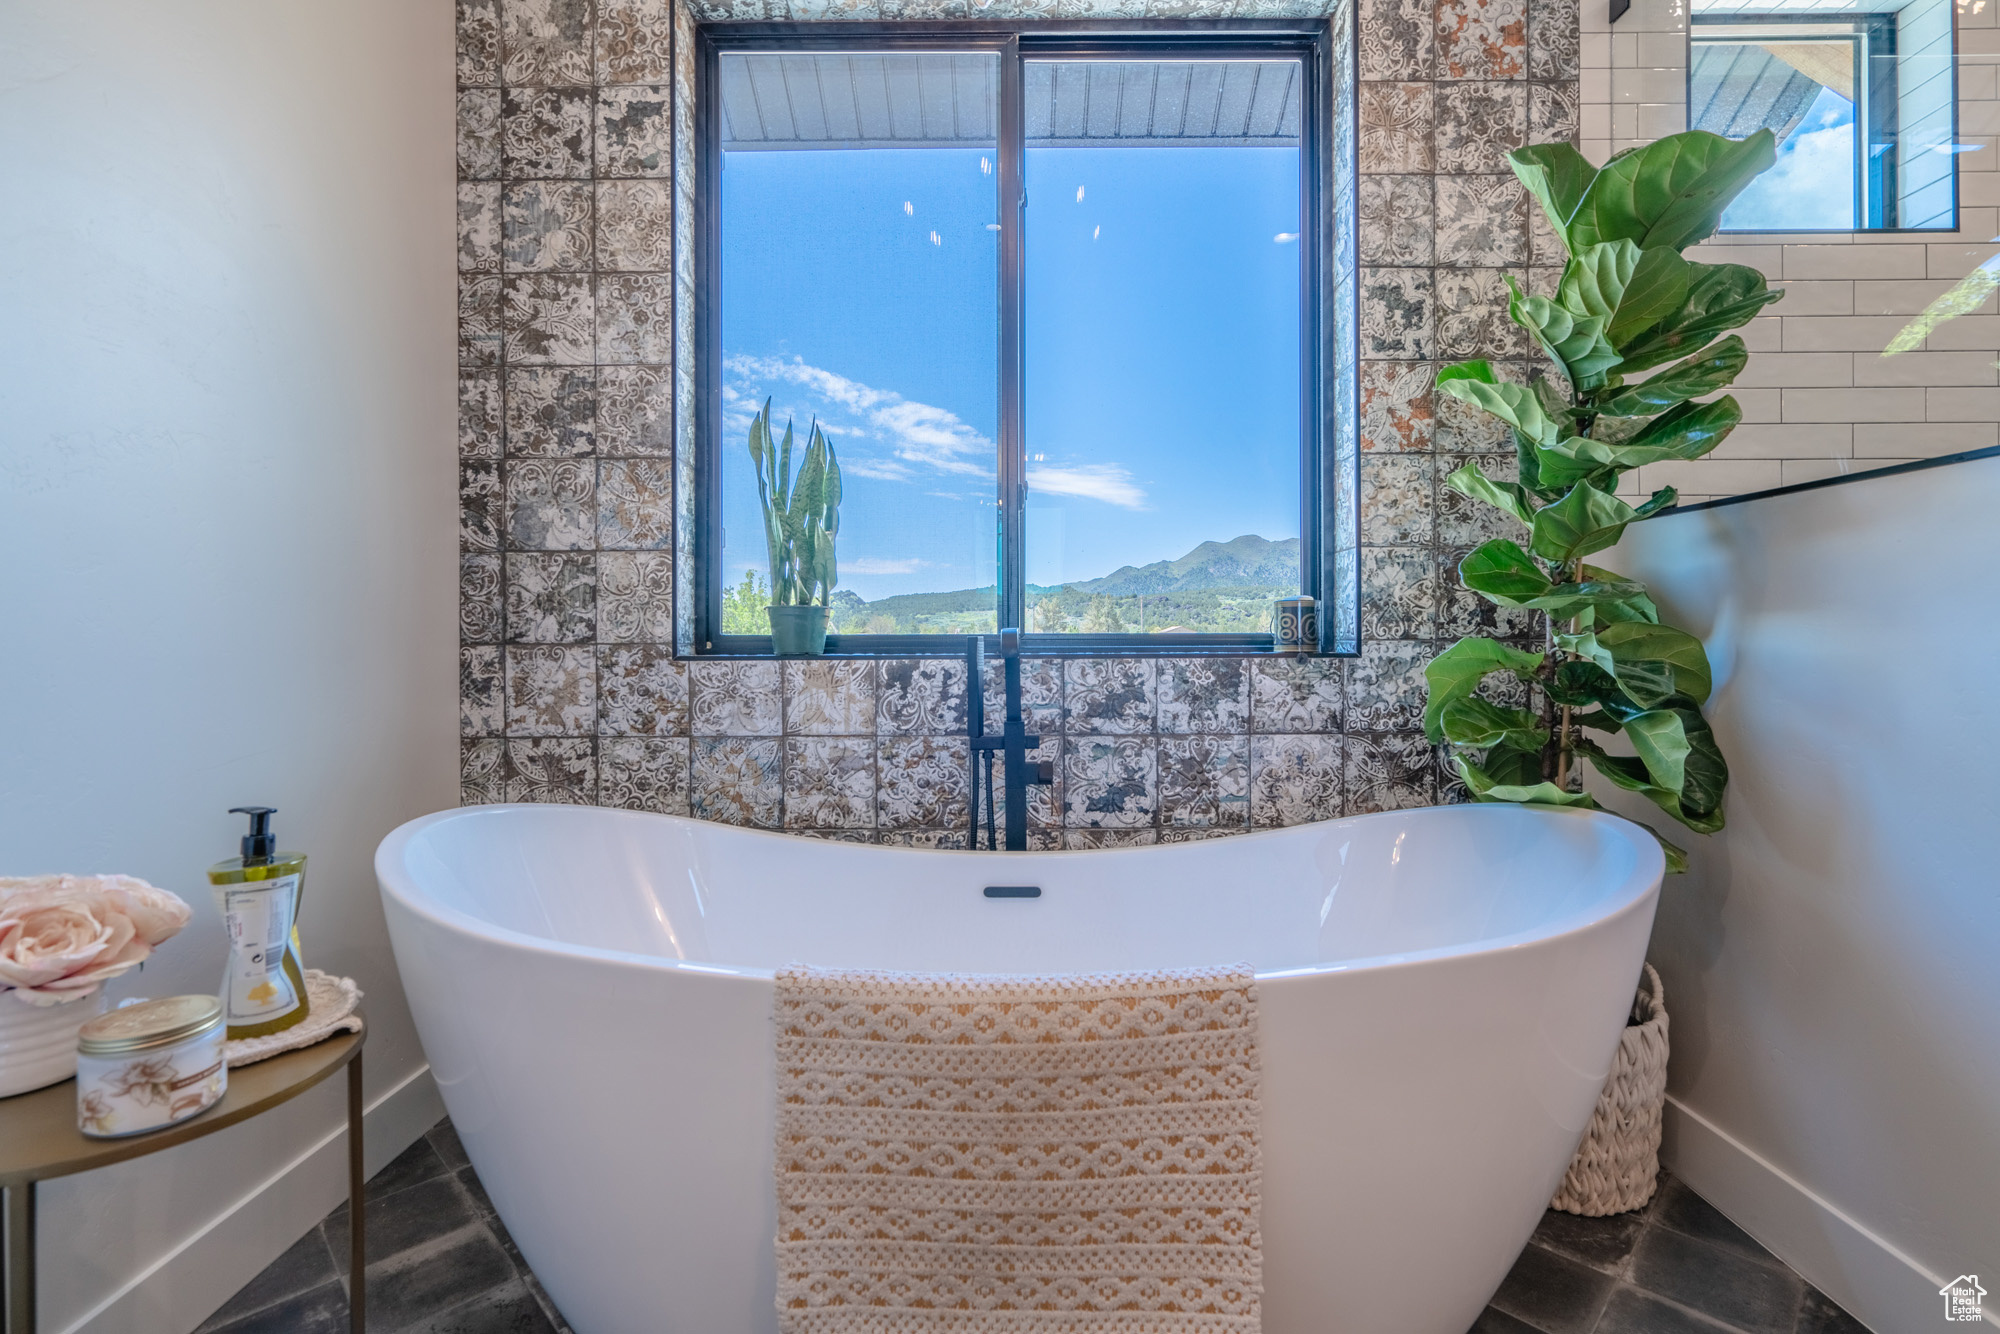 Bathroom featuring tile floors, tile walls, and a tub